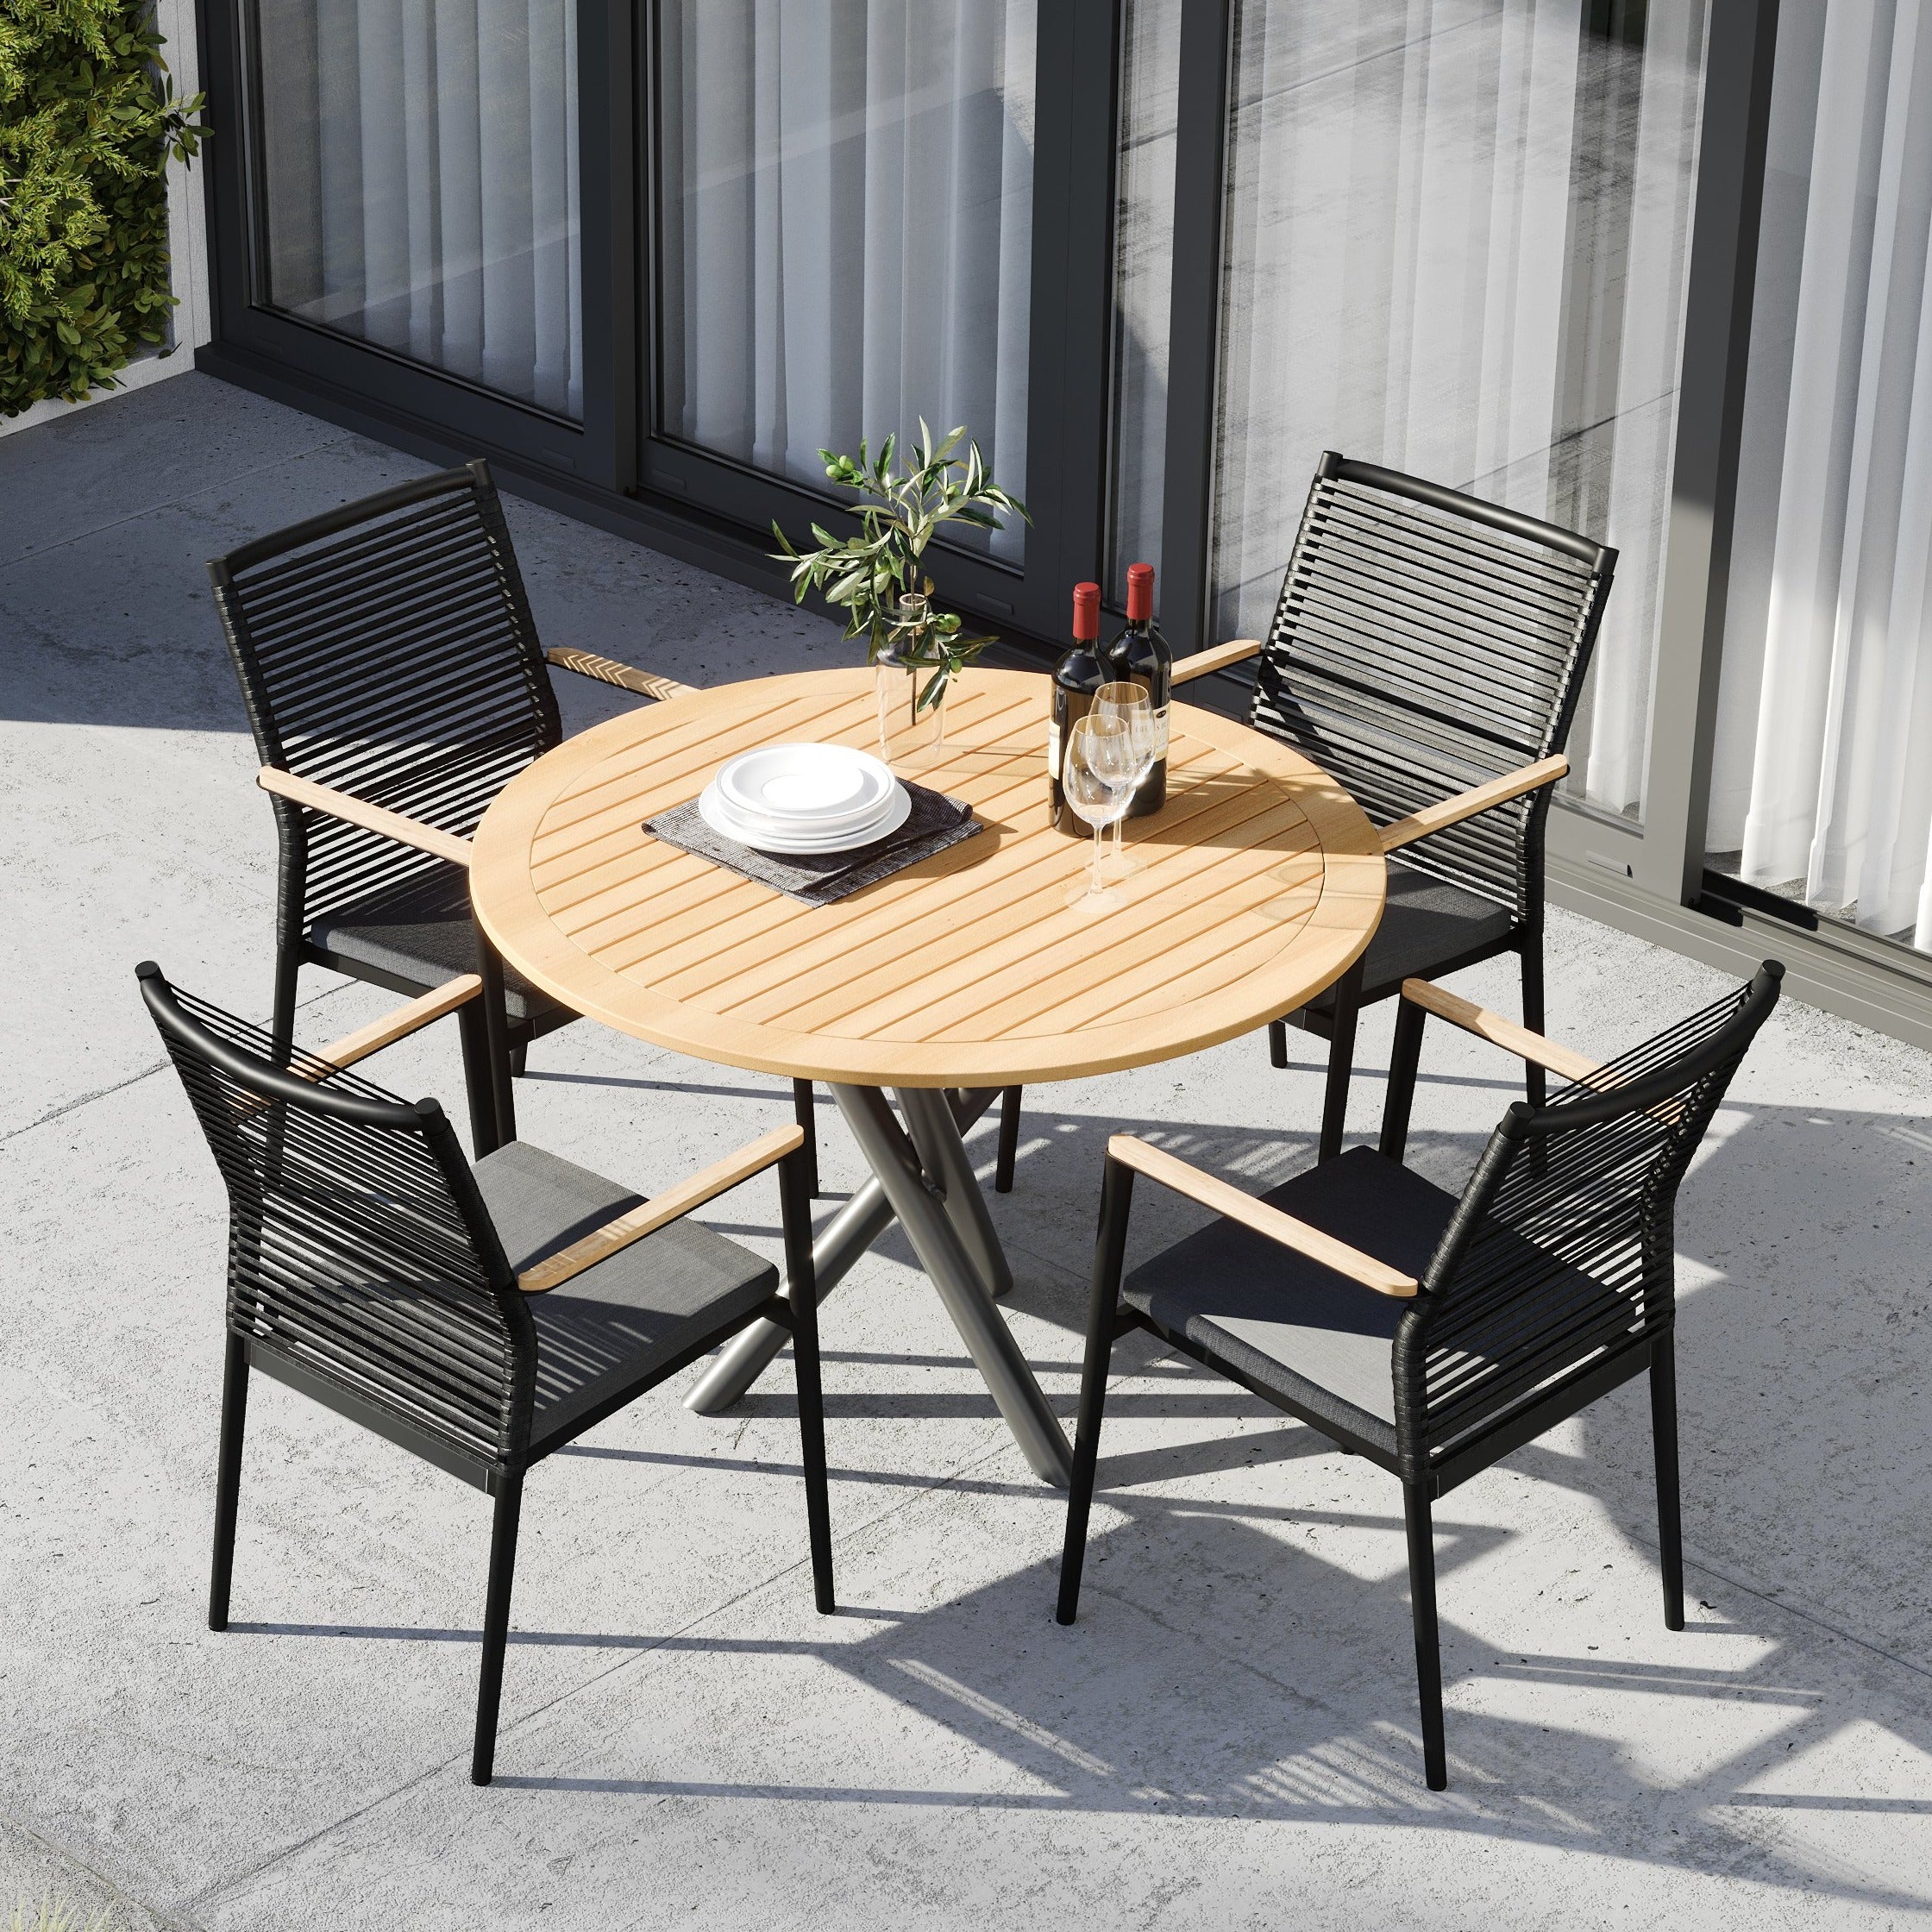 Portland 4 Seat Round Dining Set with Teak Table in Charcoal